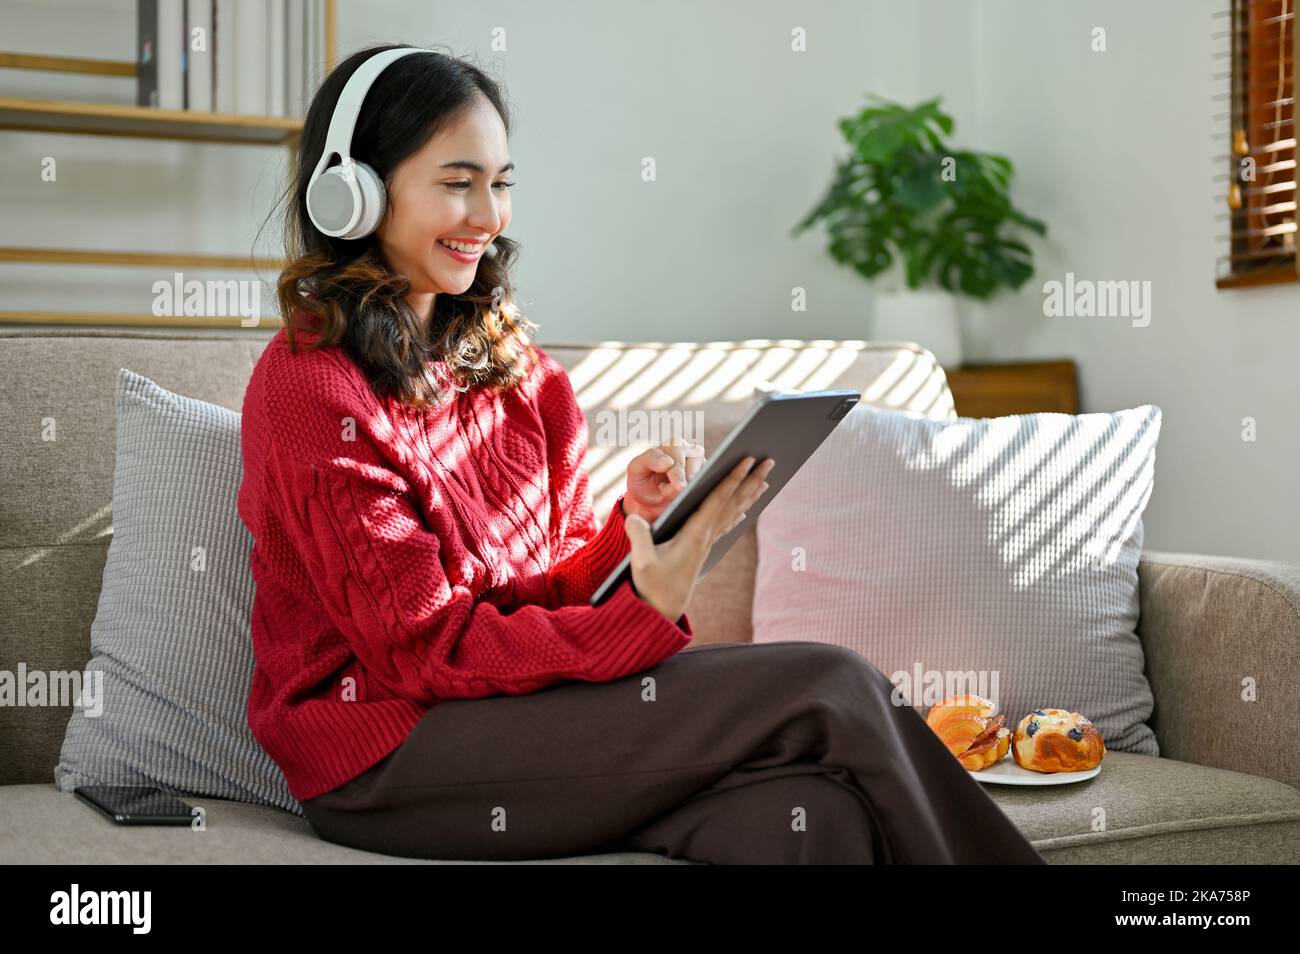 Cheerful and beautiful young Asian female in red sweater, wearing headphones, using her digital tablet, sitting on sofa in living room. Stock Photo